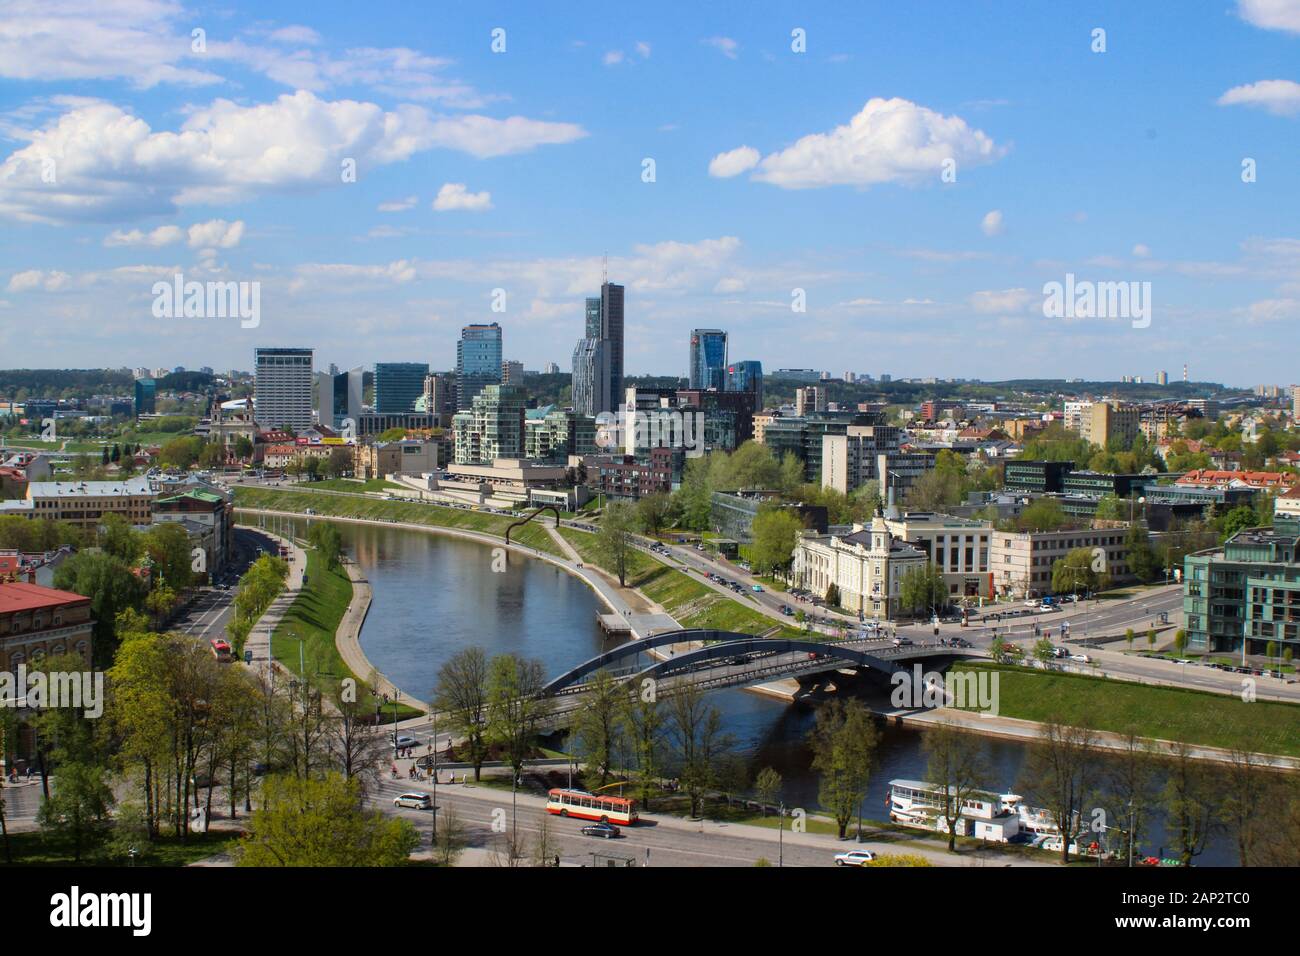 River Neris and high-rise buildings of the New City Center, also known as Šnipiškės, in Vilnius, Lithuania Stock Photo